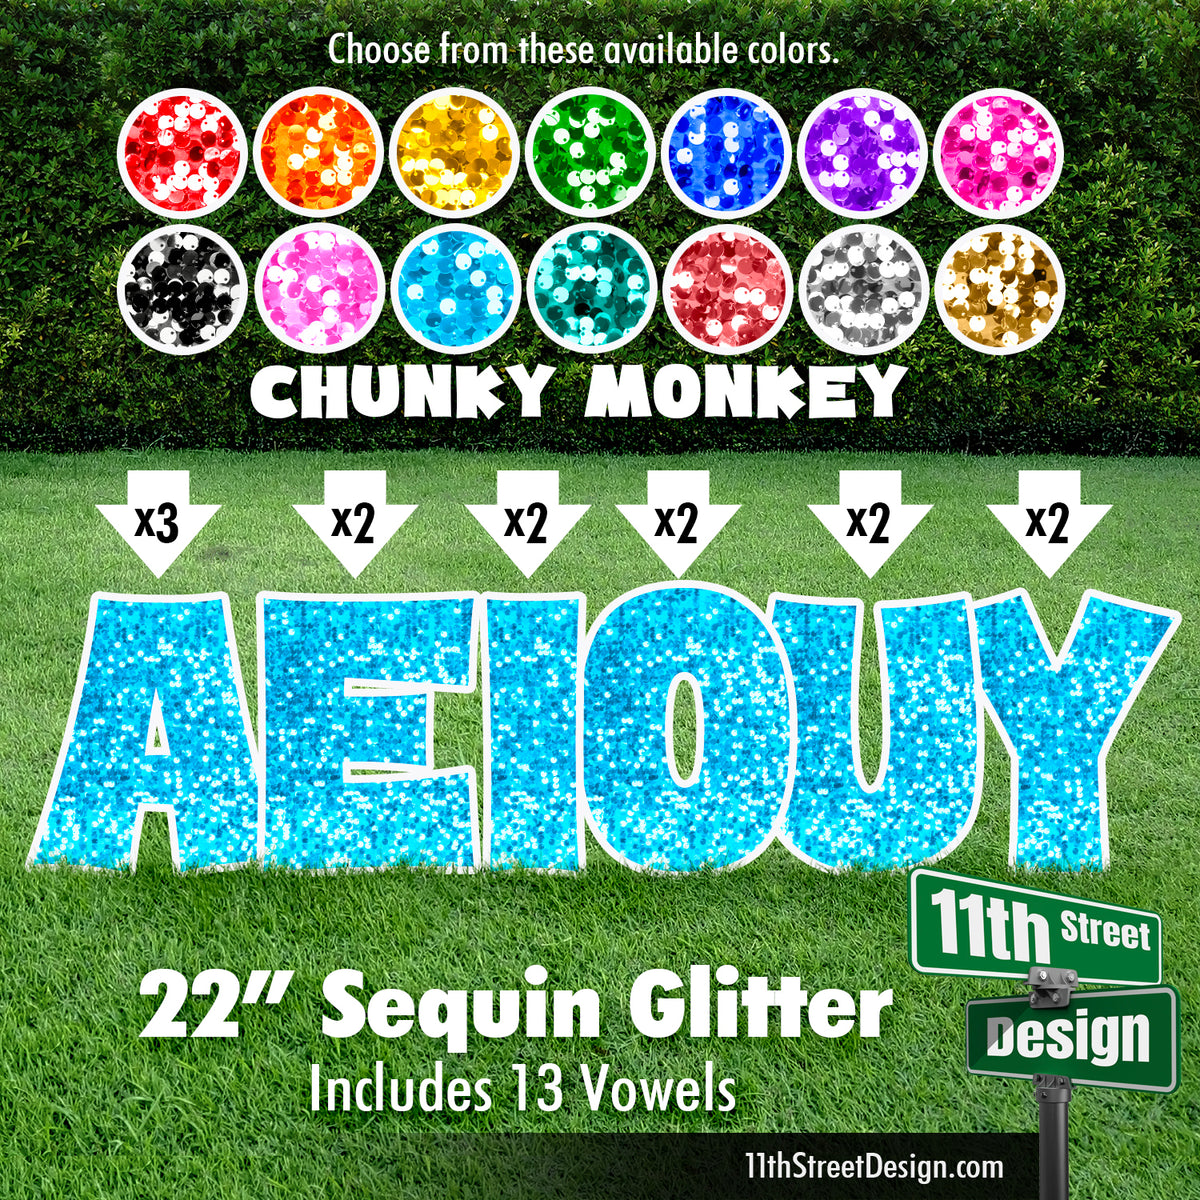 Sequin Glitter 22&quot; Chunky Monkey Yard Card Set Includes 13 Vowels